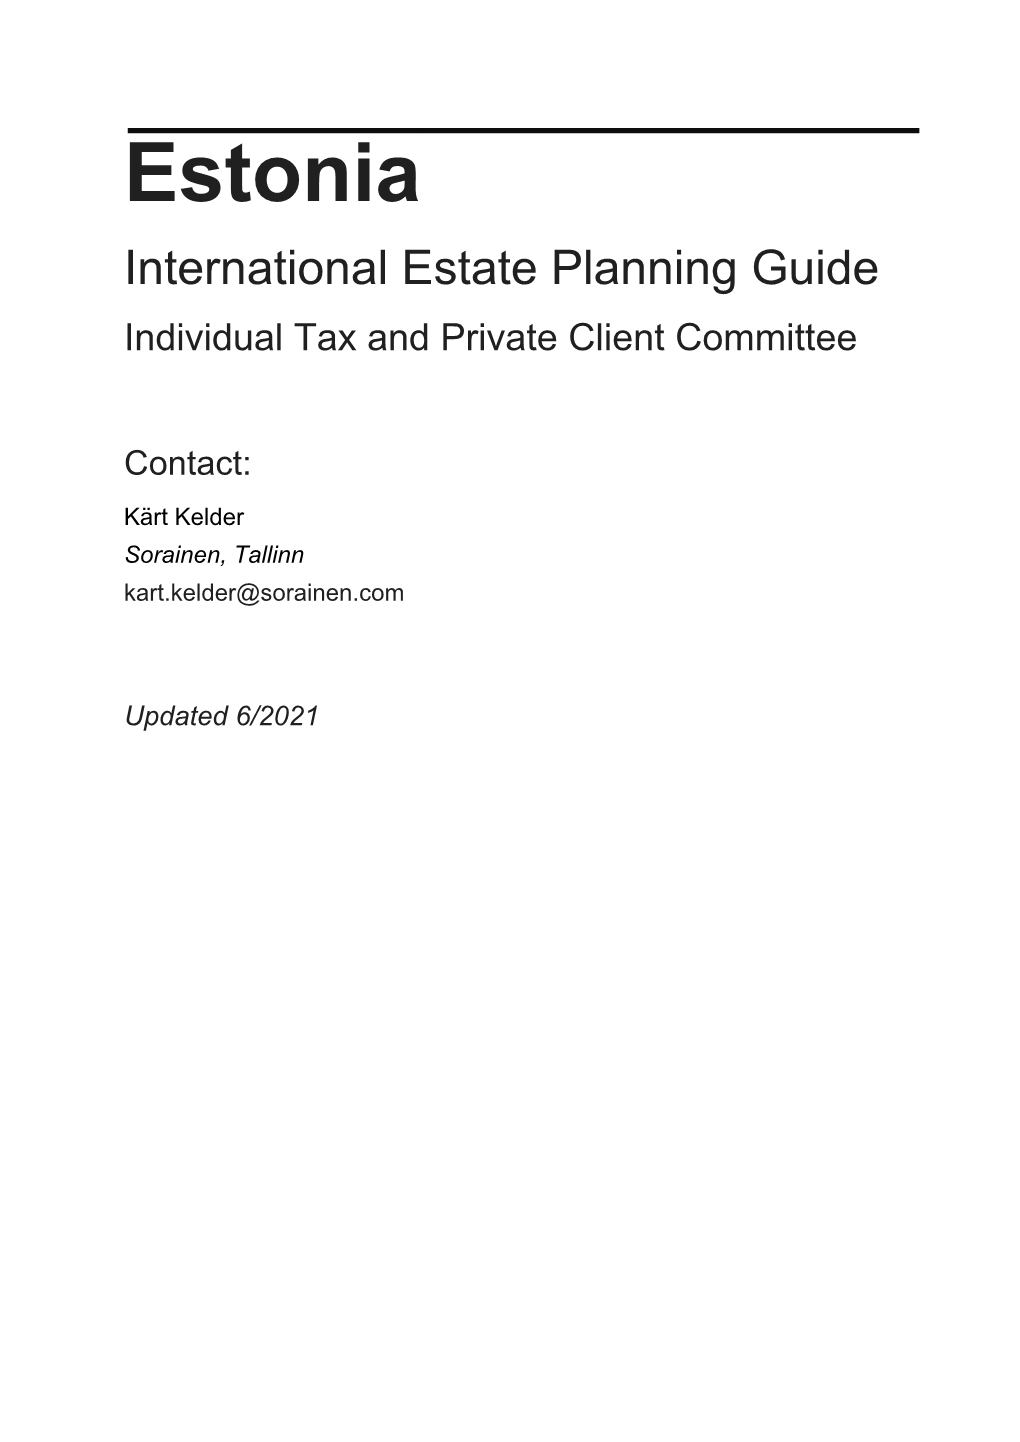 Estonia International Estate Planning Guide Individual Tax and Private Client Committee